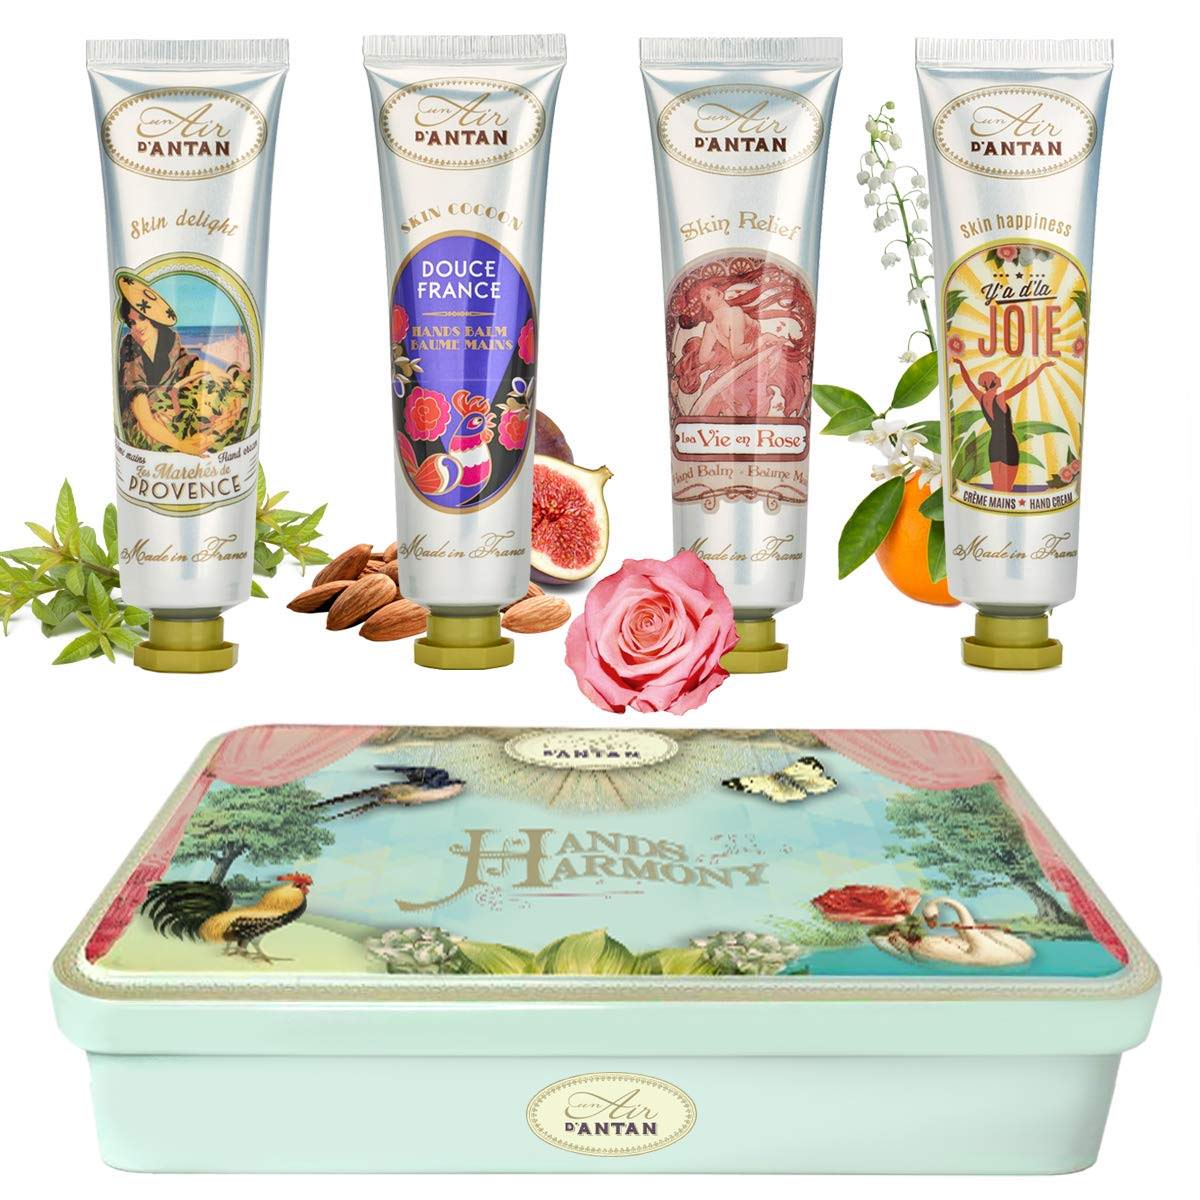 Hand Cream Set From Un Air d'Antan Having Main Ingredients such as Shea Butter, Aloe Vera, Almond Oil Which Are Very Good For Hands In Winter.